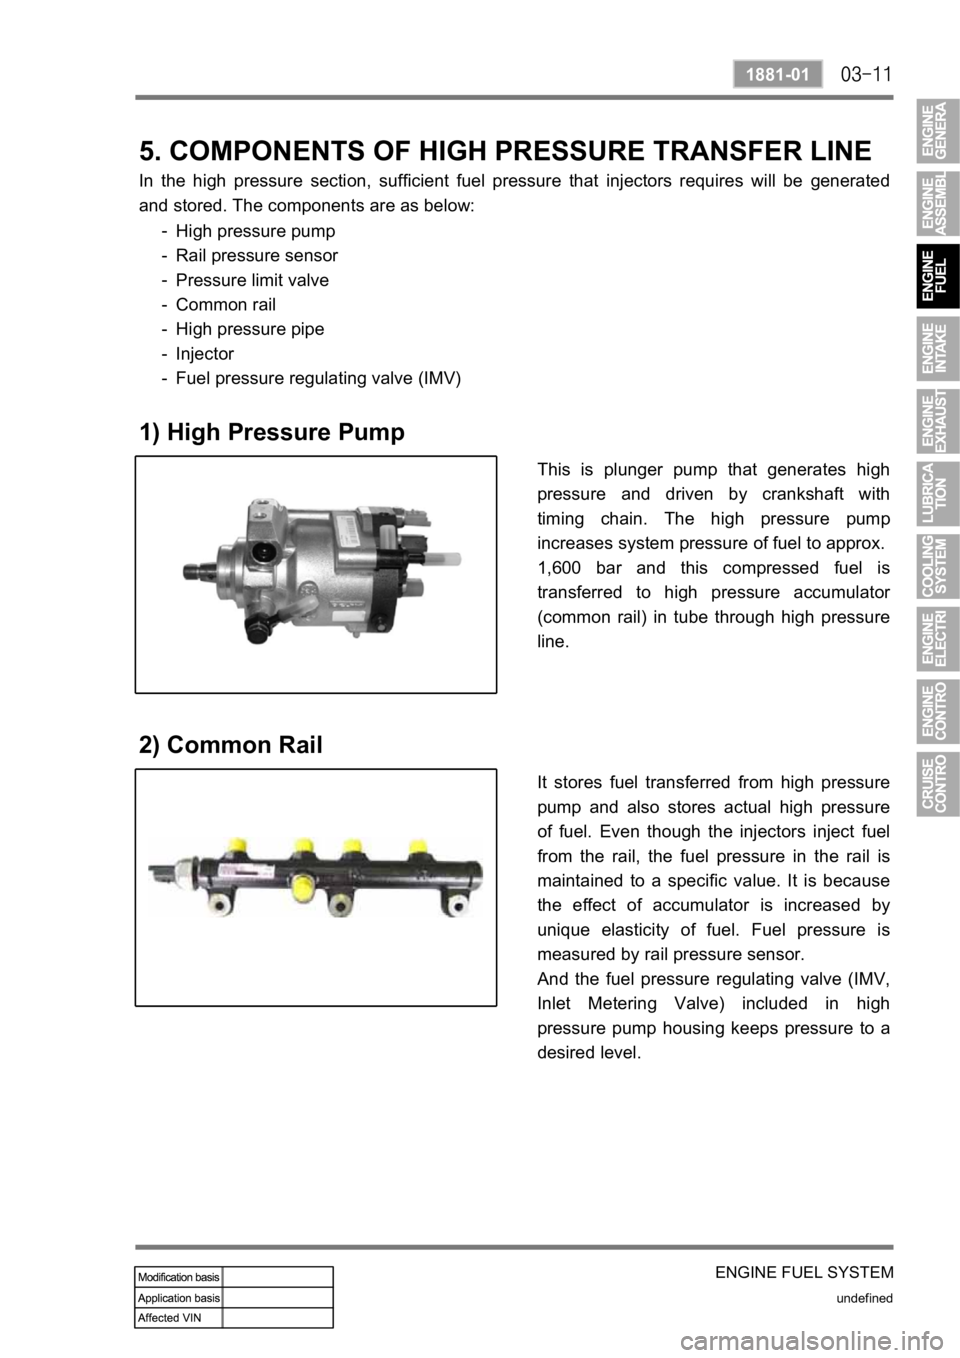 SSANGYONG KYRON 2010  Service Manual ENGINE FUEL SYSTEM
undefined
1881-01
5. COMPONENTS OF HIGH PRESSURE TRANSFER LINE
In  the  high  pressure  section,  sufficient  fuel  pressure  that  injectors  requires  will  be  generated 
and sto